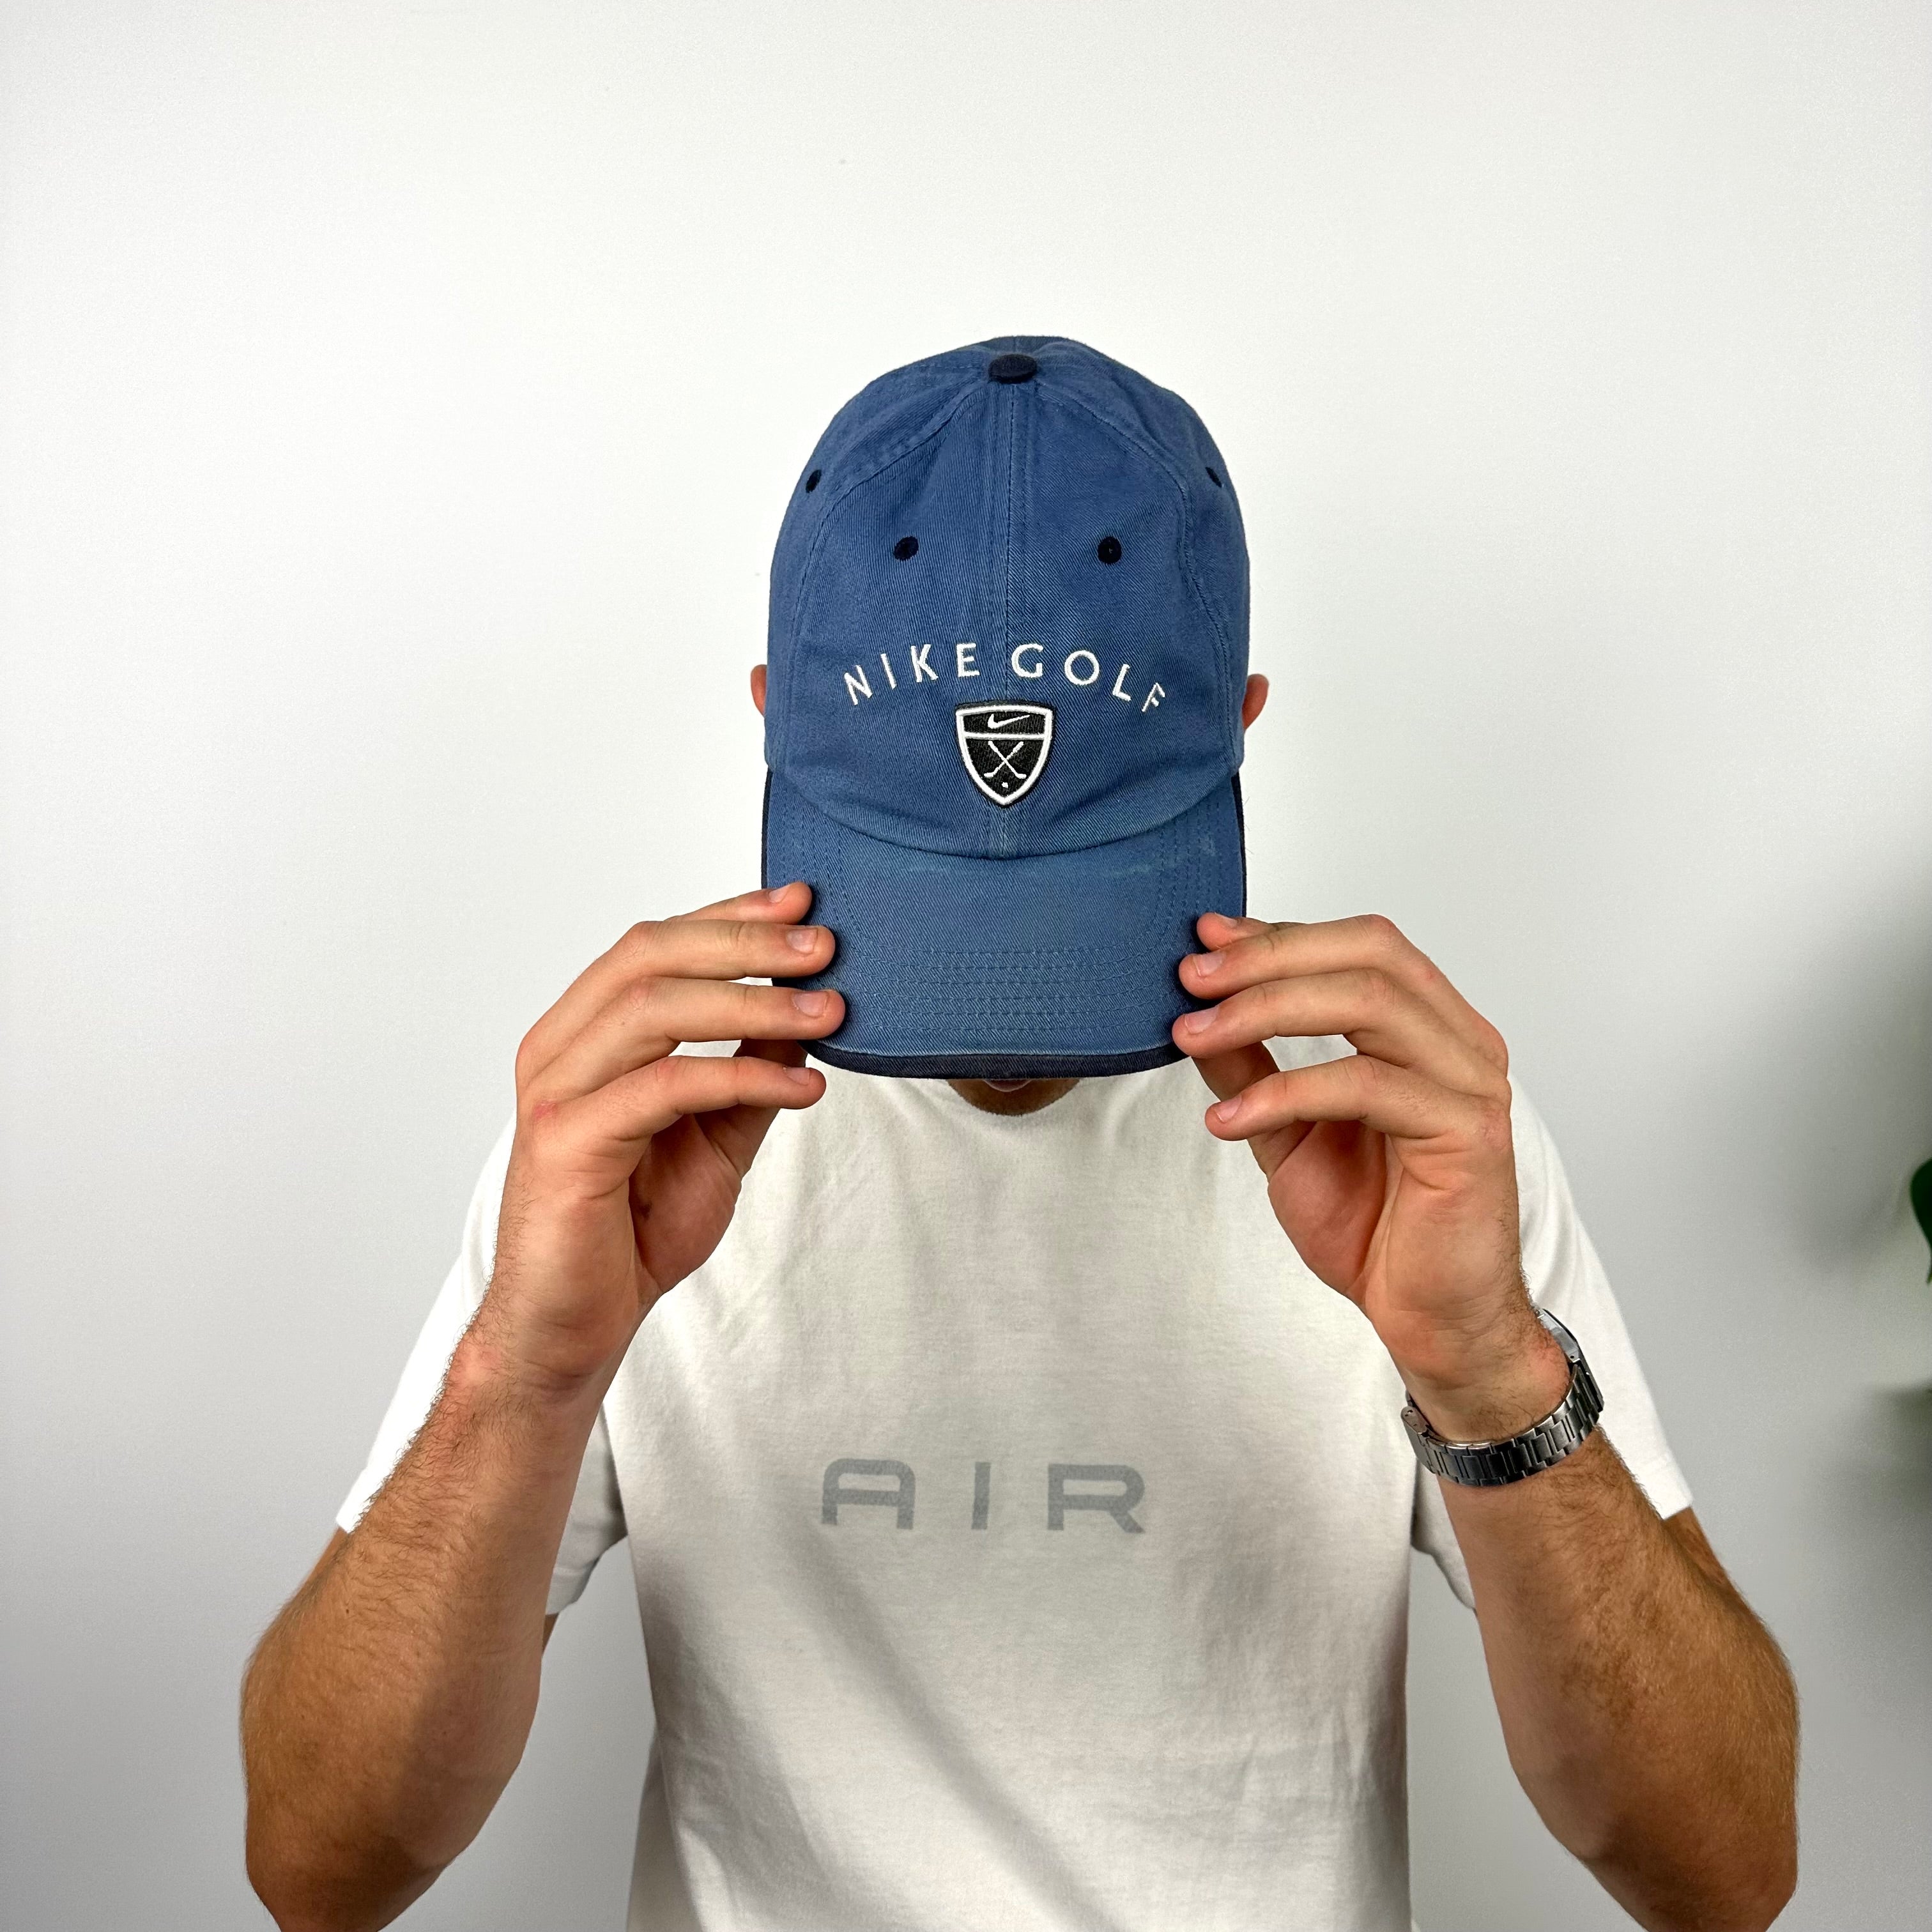 Nike Golf Blue Embroidered Spell Out Cap